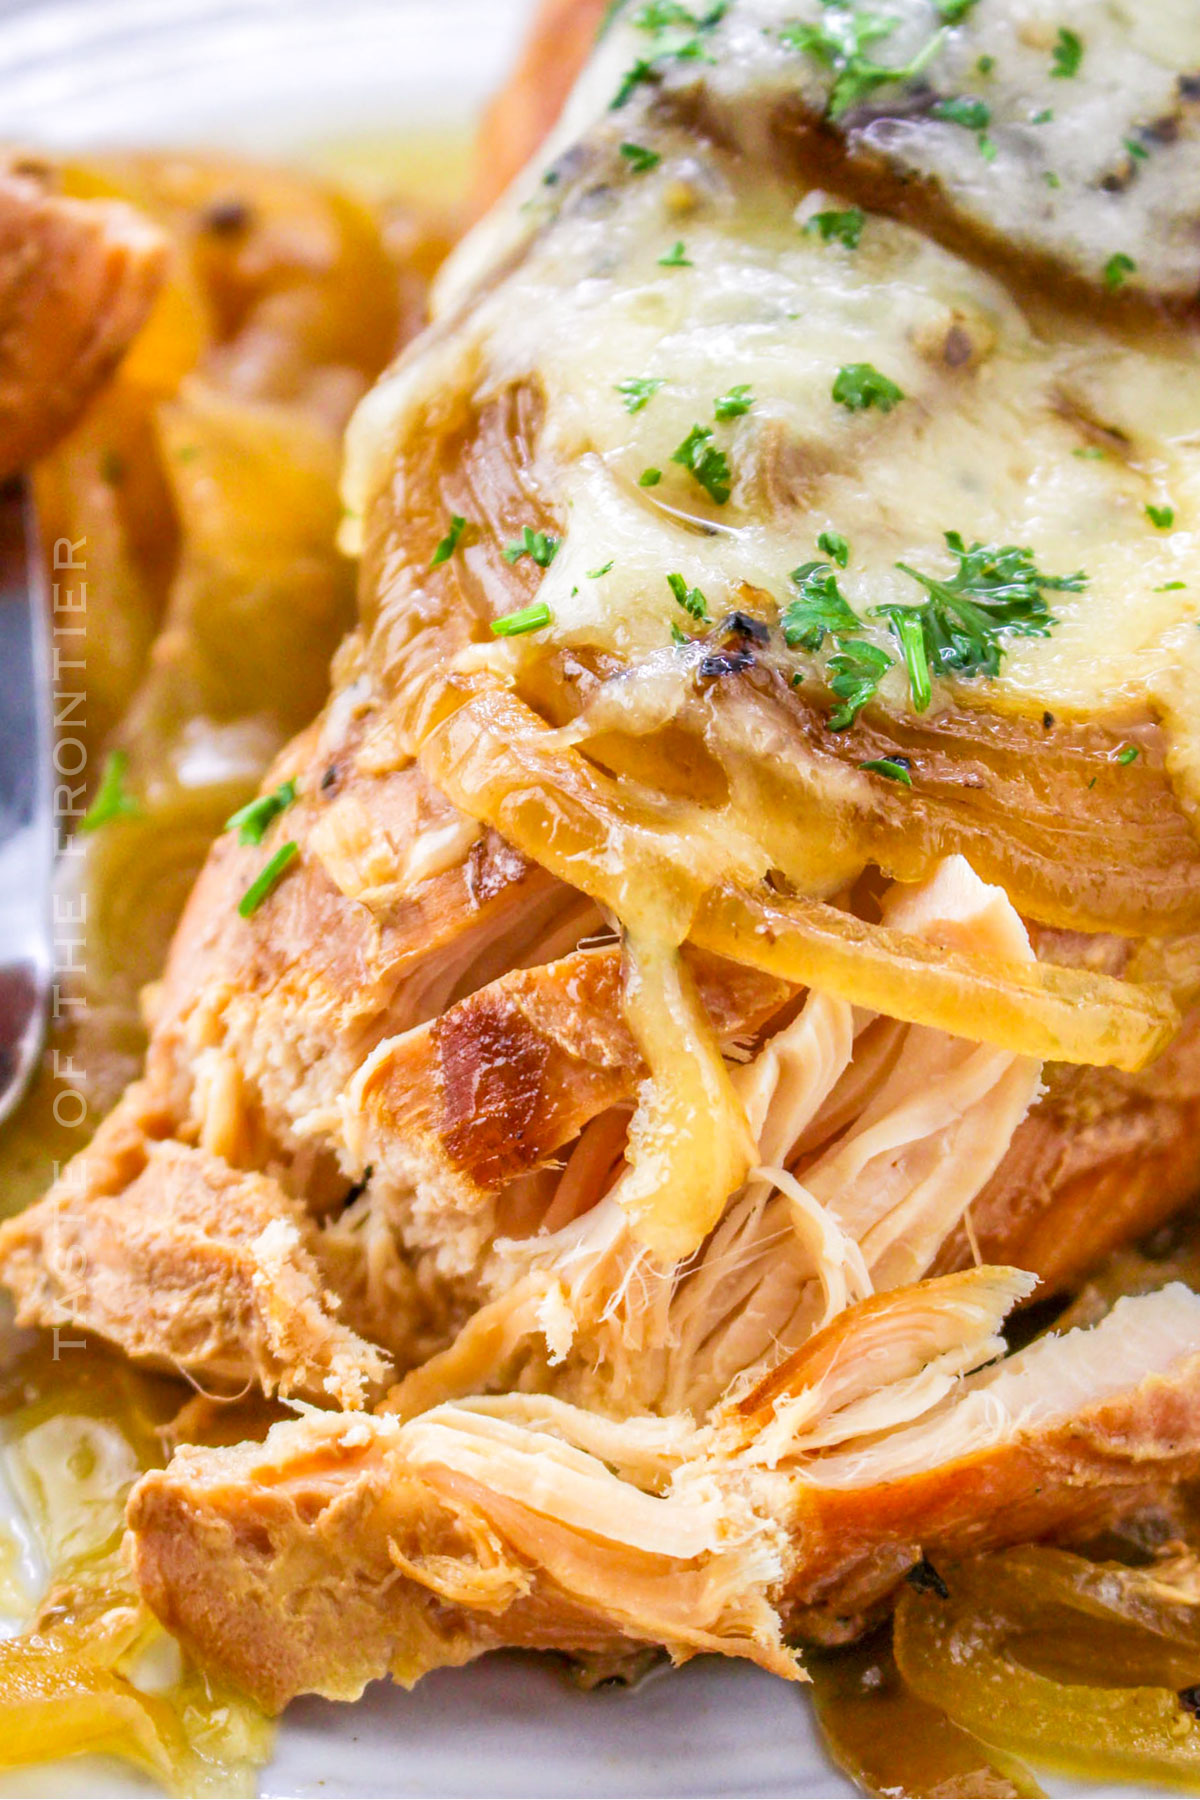 Slow Cooker French Onion Chicken